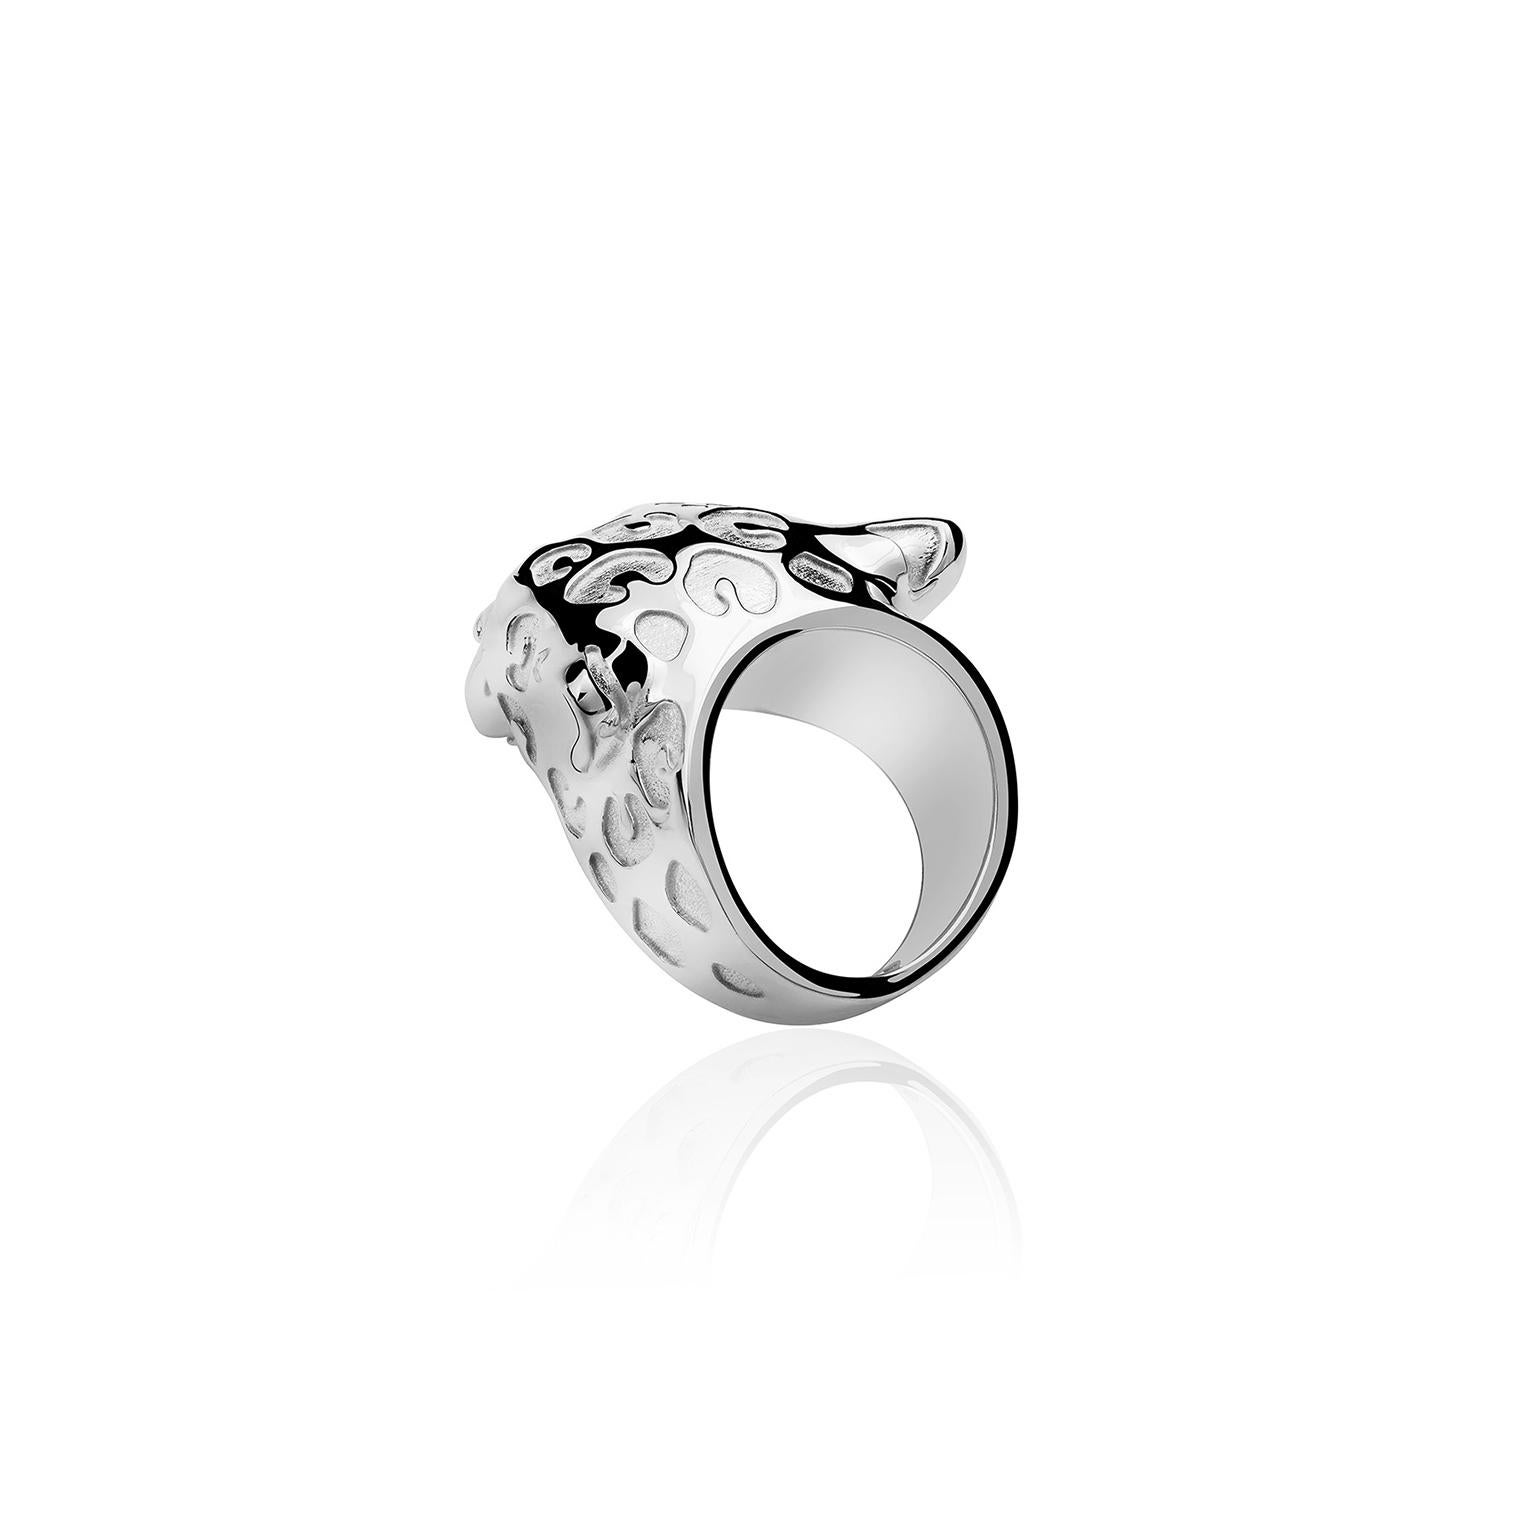 The Jaguar Ring  from the Animal´s Collection by TANE is made in silver .925, it´s total shape is a jaguar's head with spots in relief, harmoniously distributed along the length and width of its surface. Handmade in Mexico.

To preserve the beauty